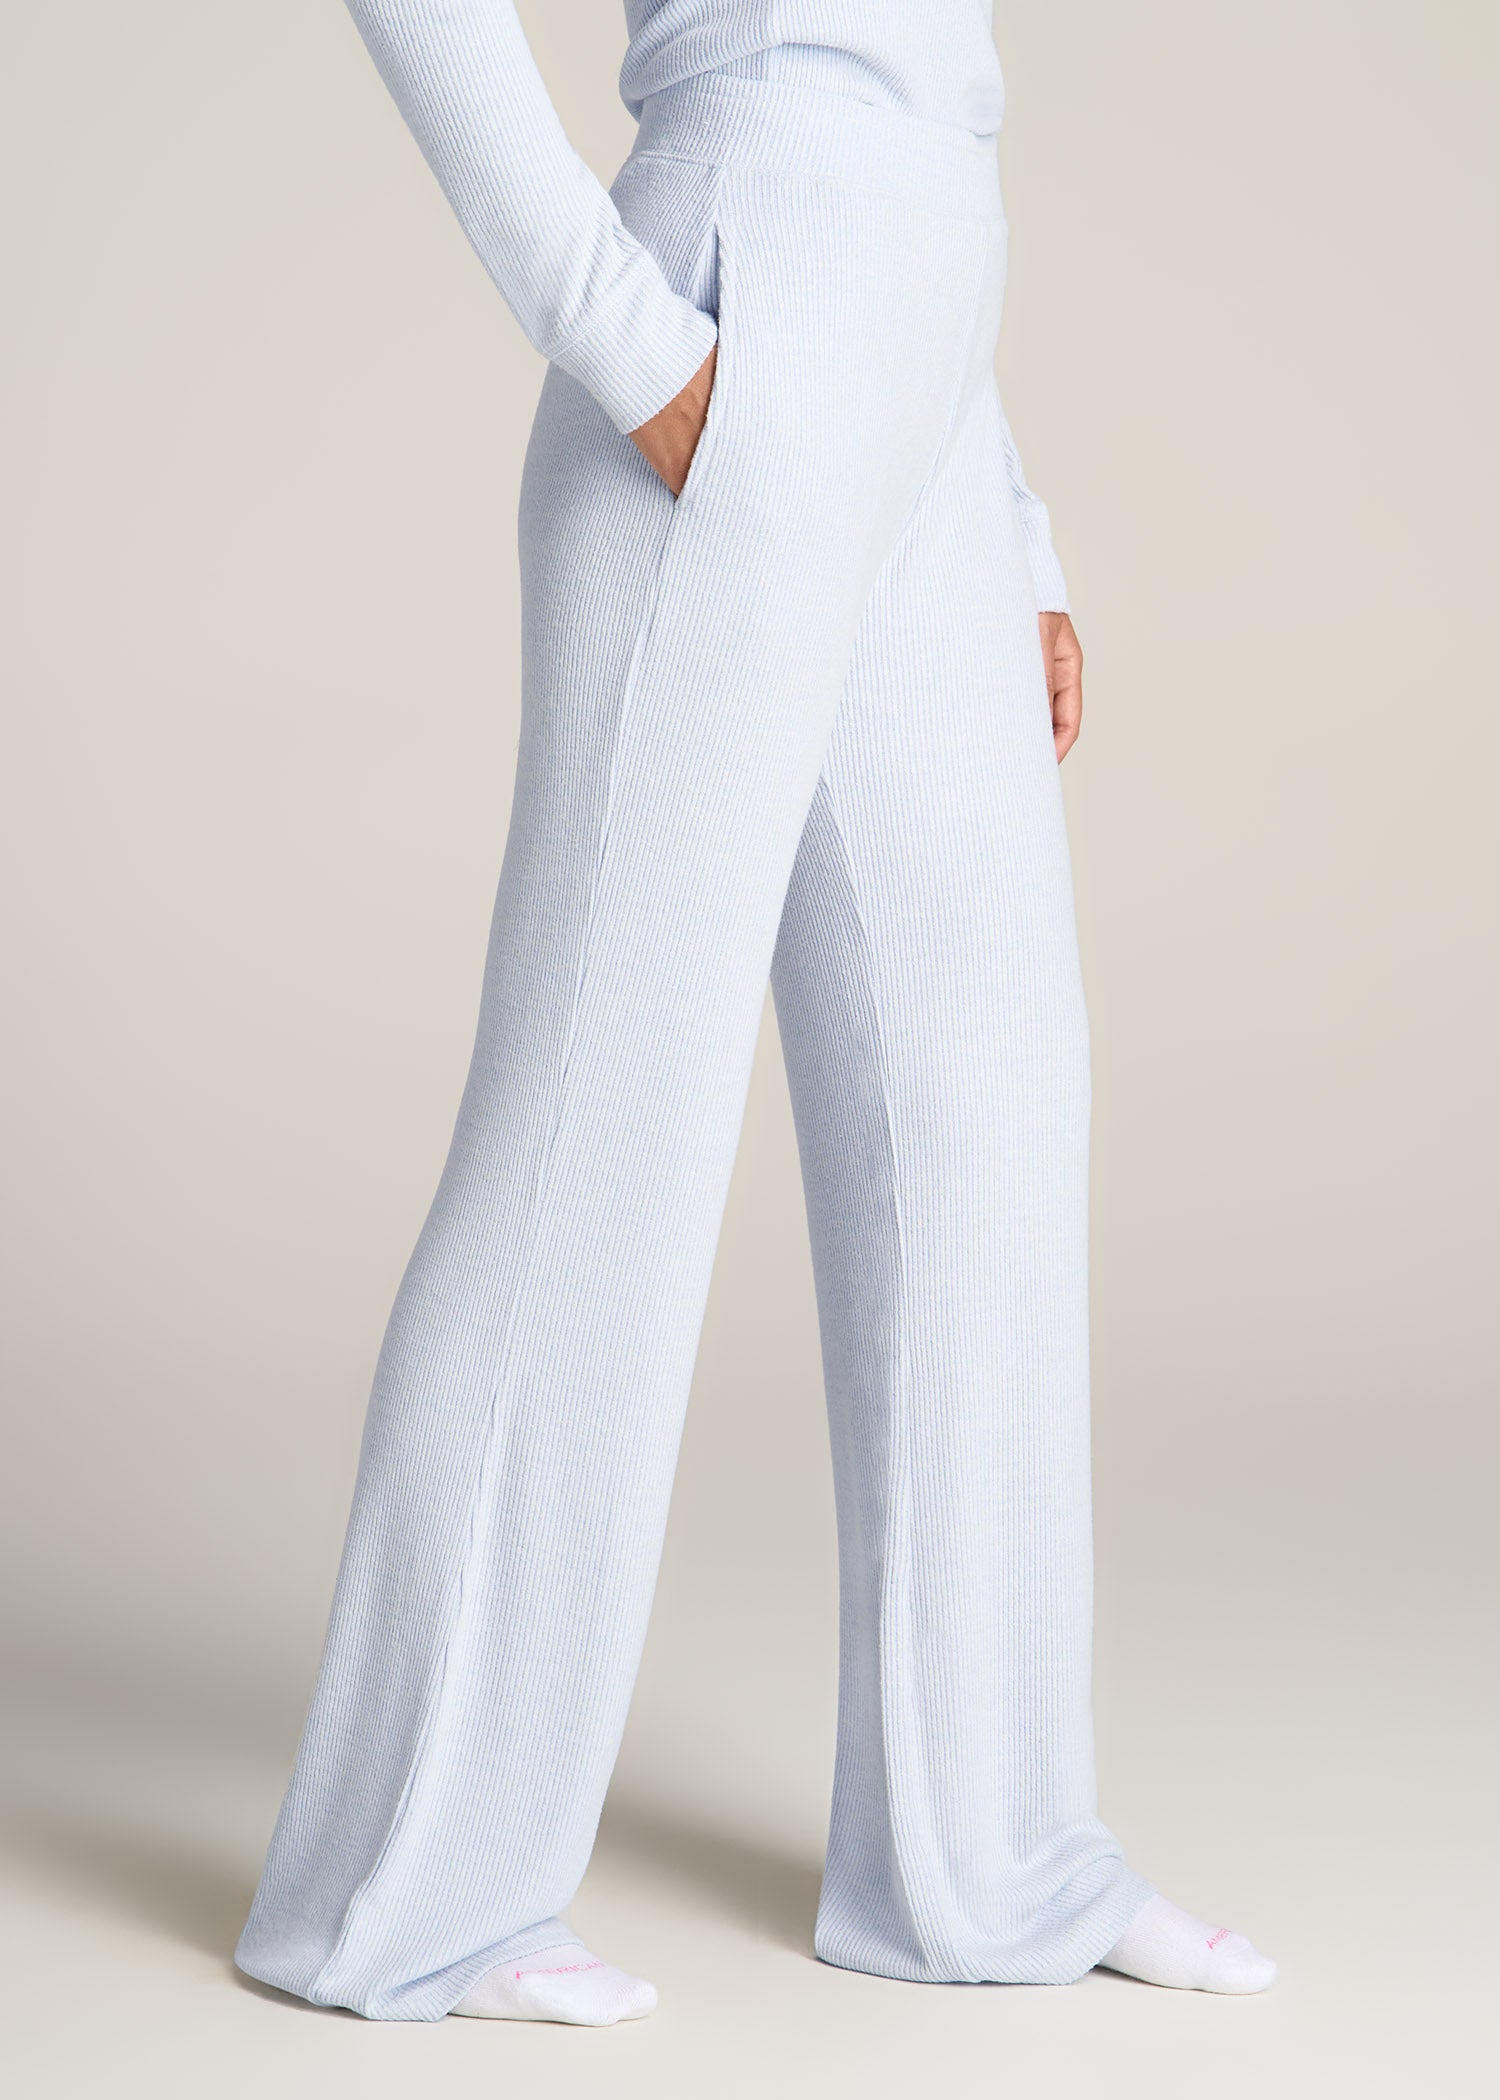 Women's Ribbed Flare Extra-Long Lounge Pants in Bluebird Mix